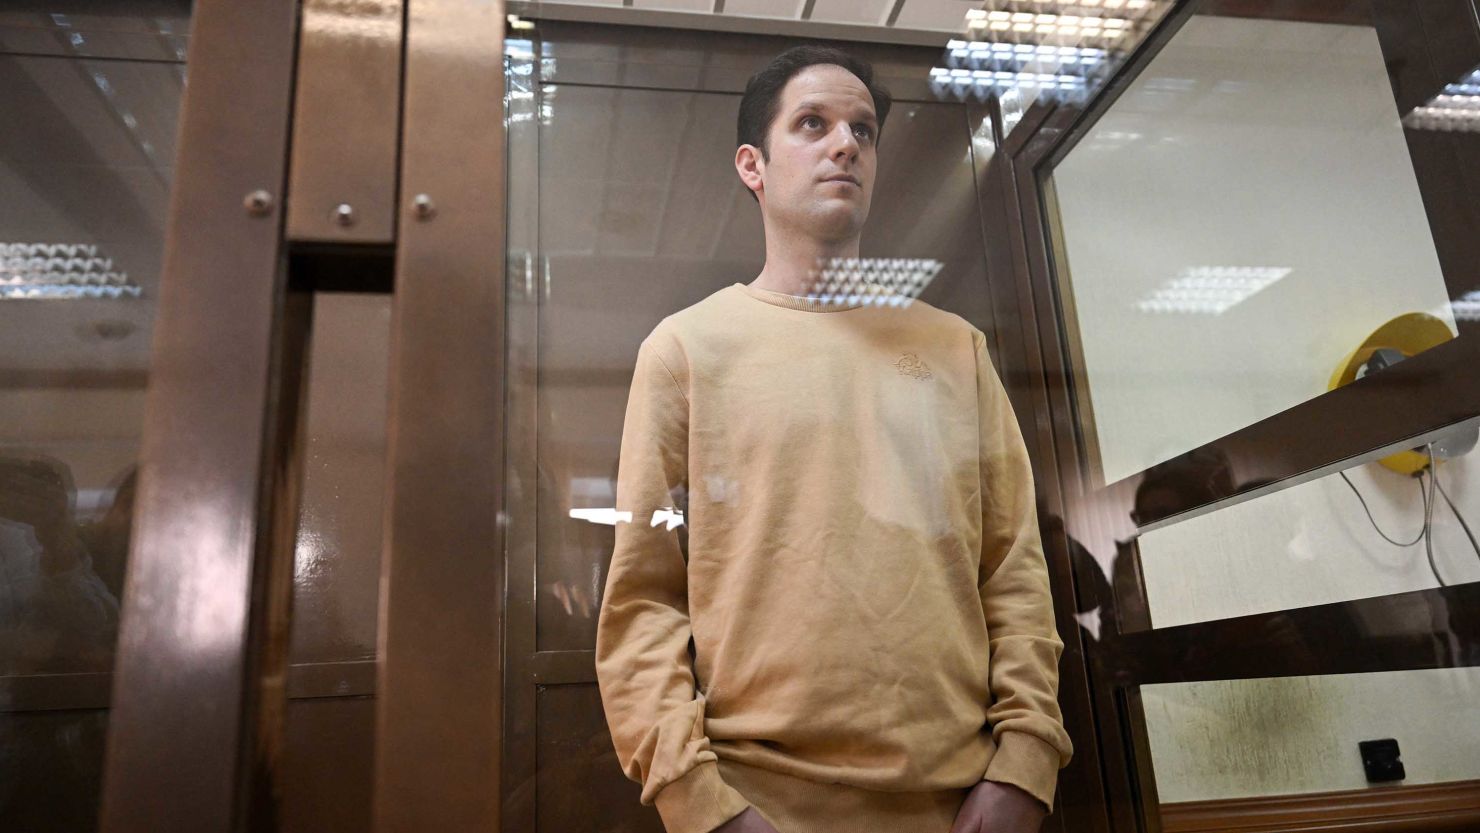 Evan Gershkovich stands inside a defendants' cage before a hearing in Moscow on Tuesday.